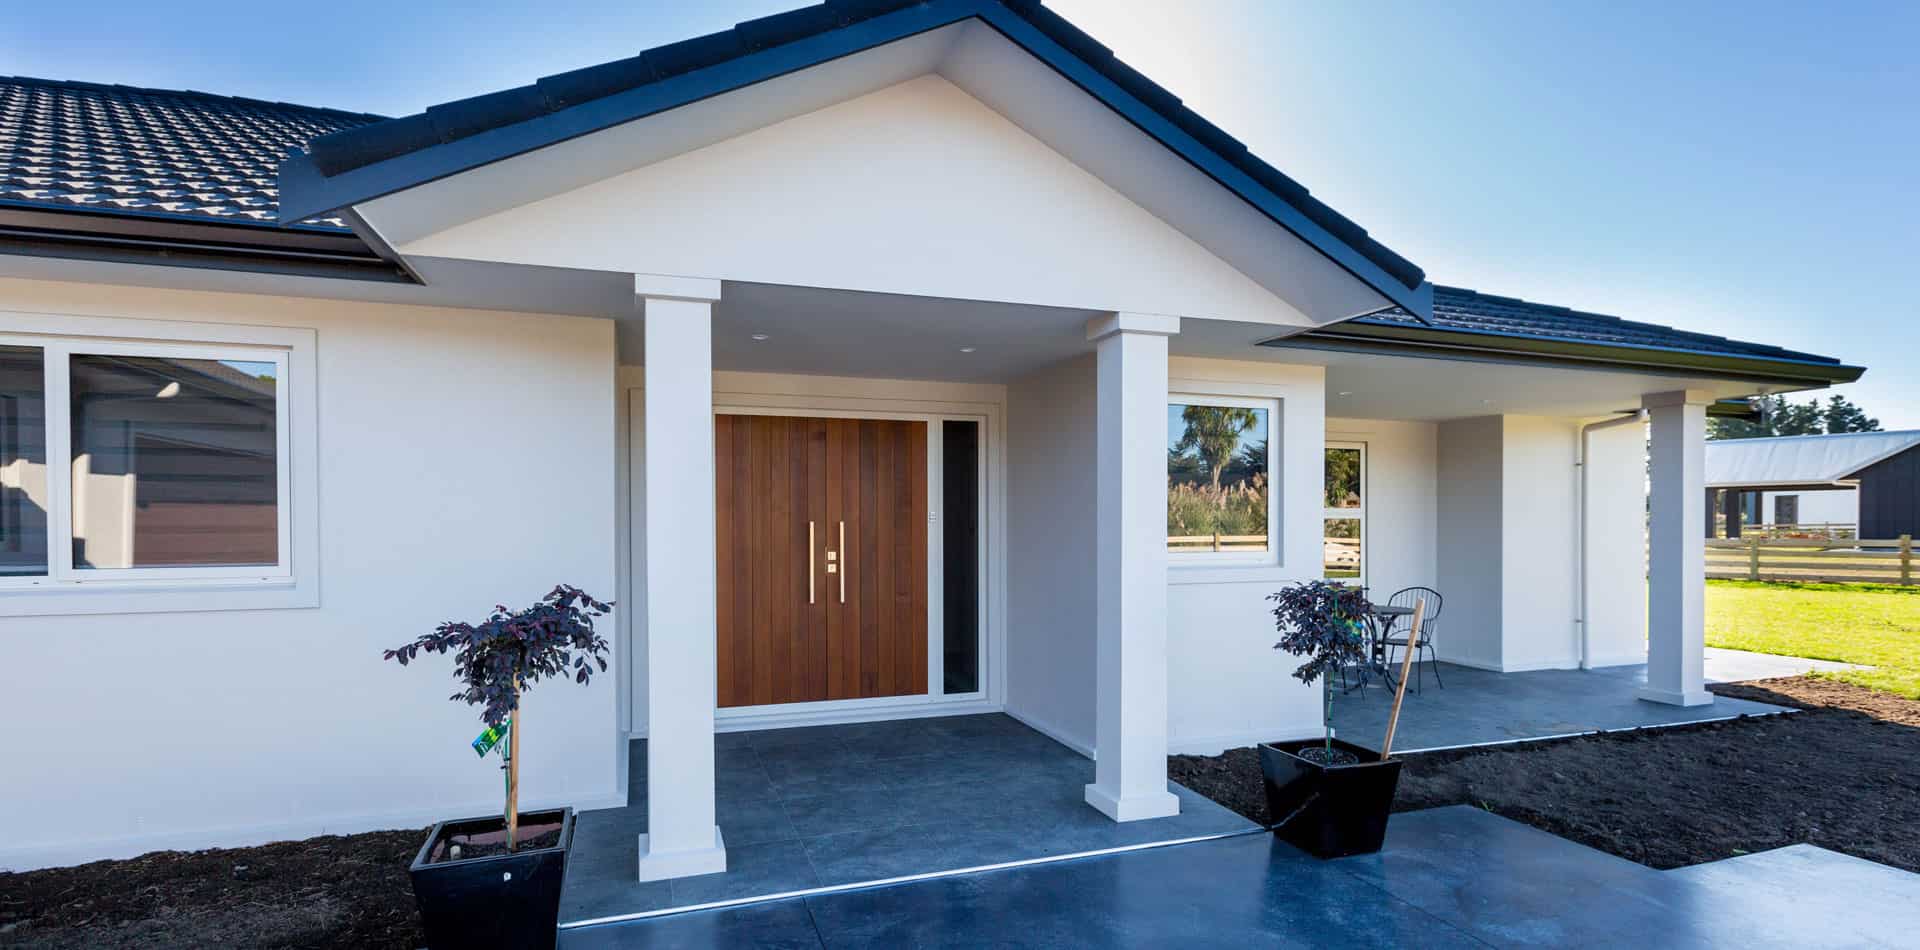 Fowler-Homes-design-and-build-new-zealand-wide-previous-builds-Manawatu-Meads-2